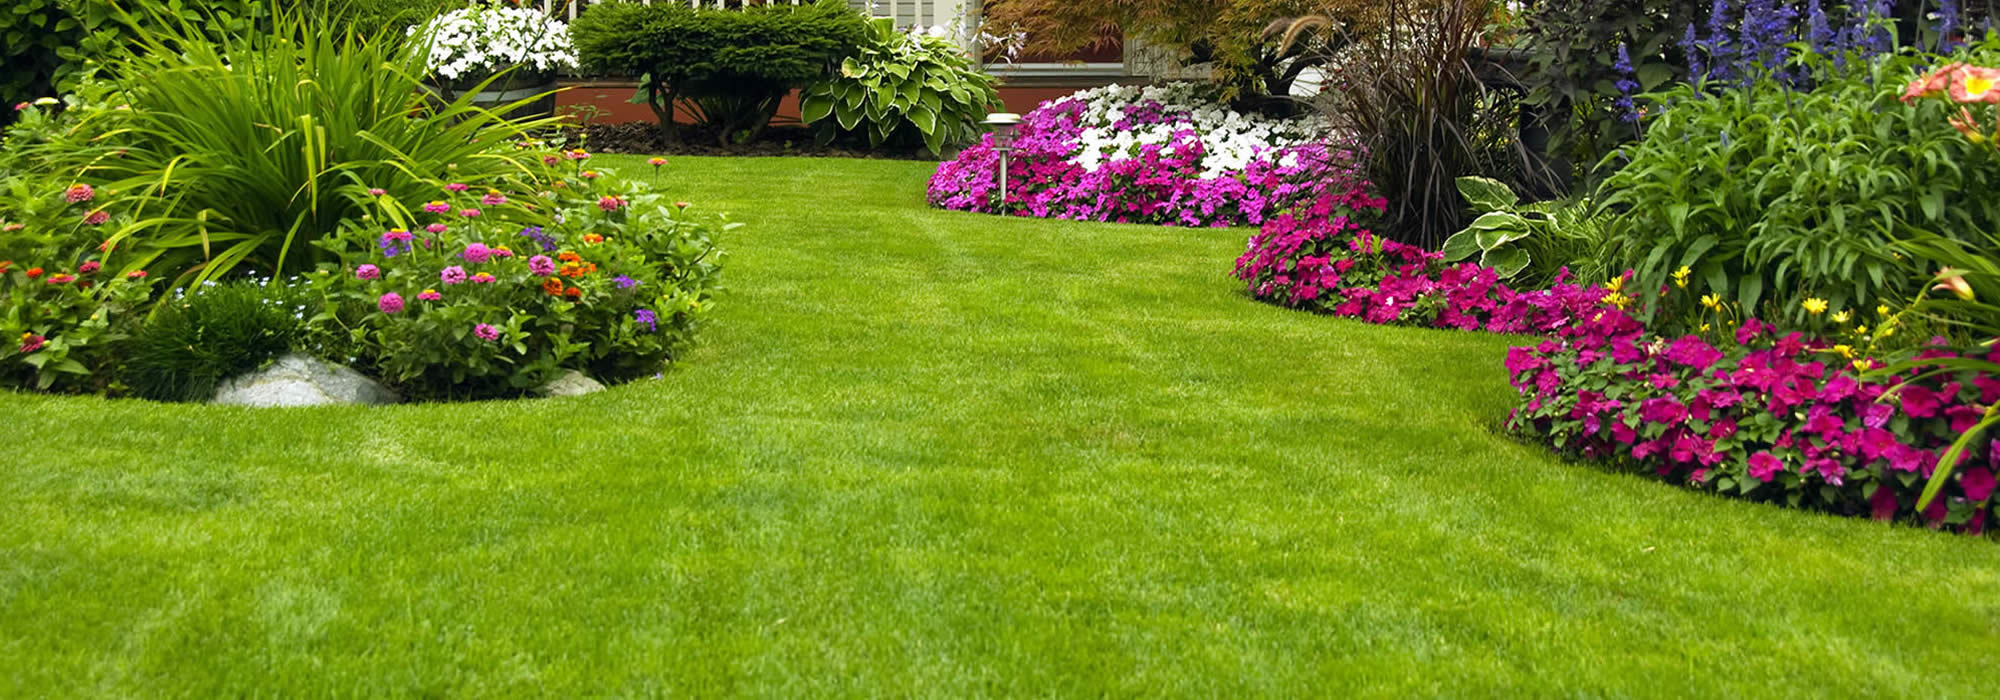 Local Landscaping Services Florida